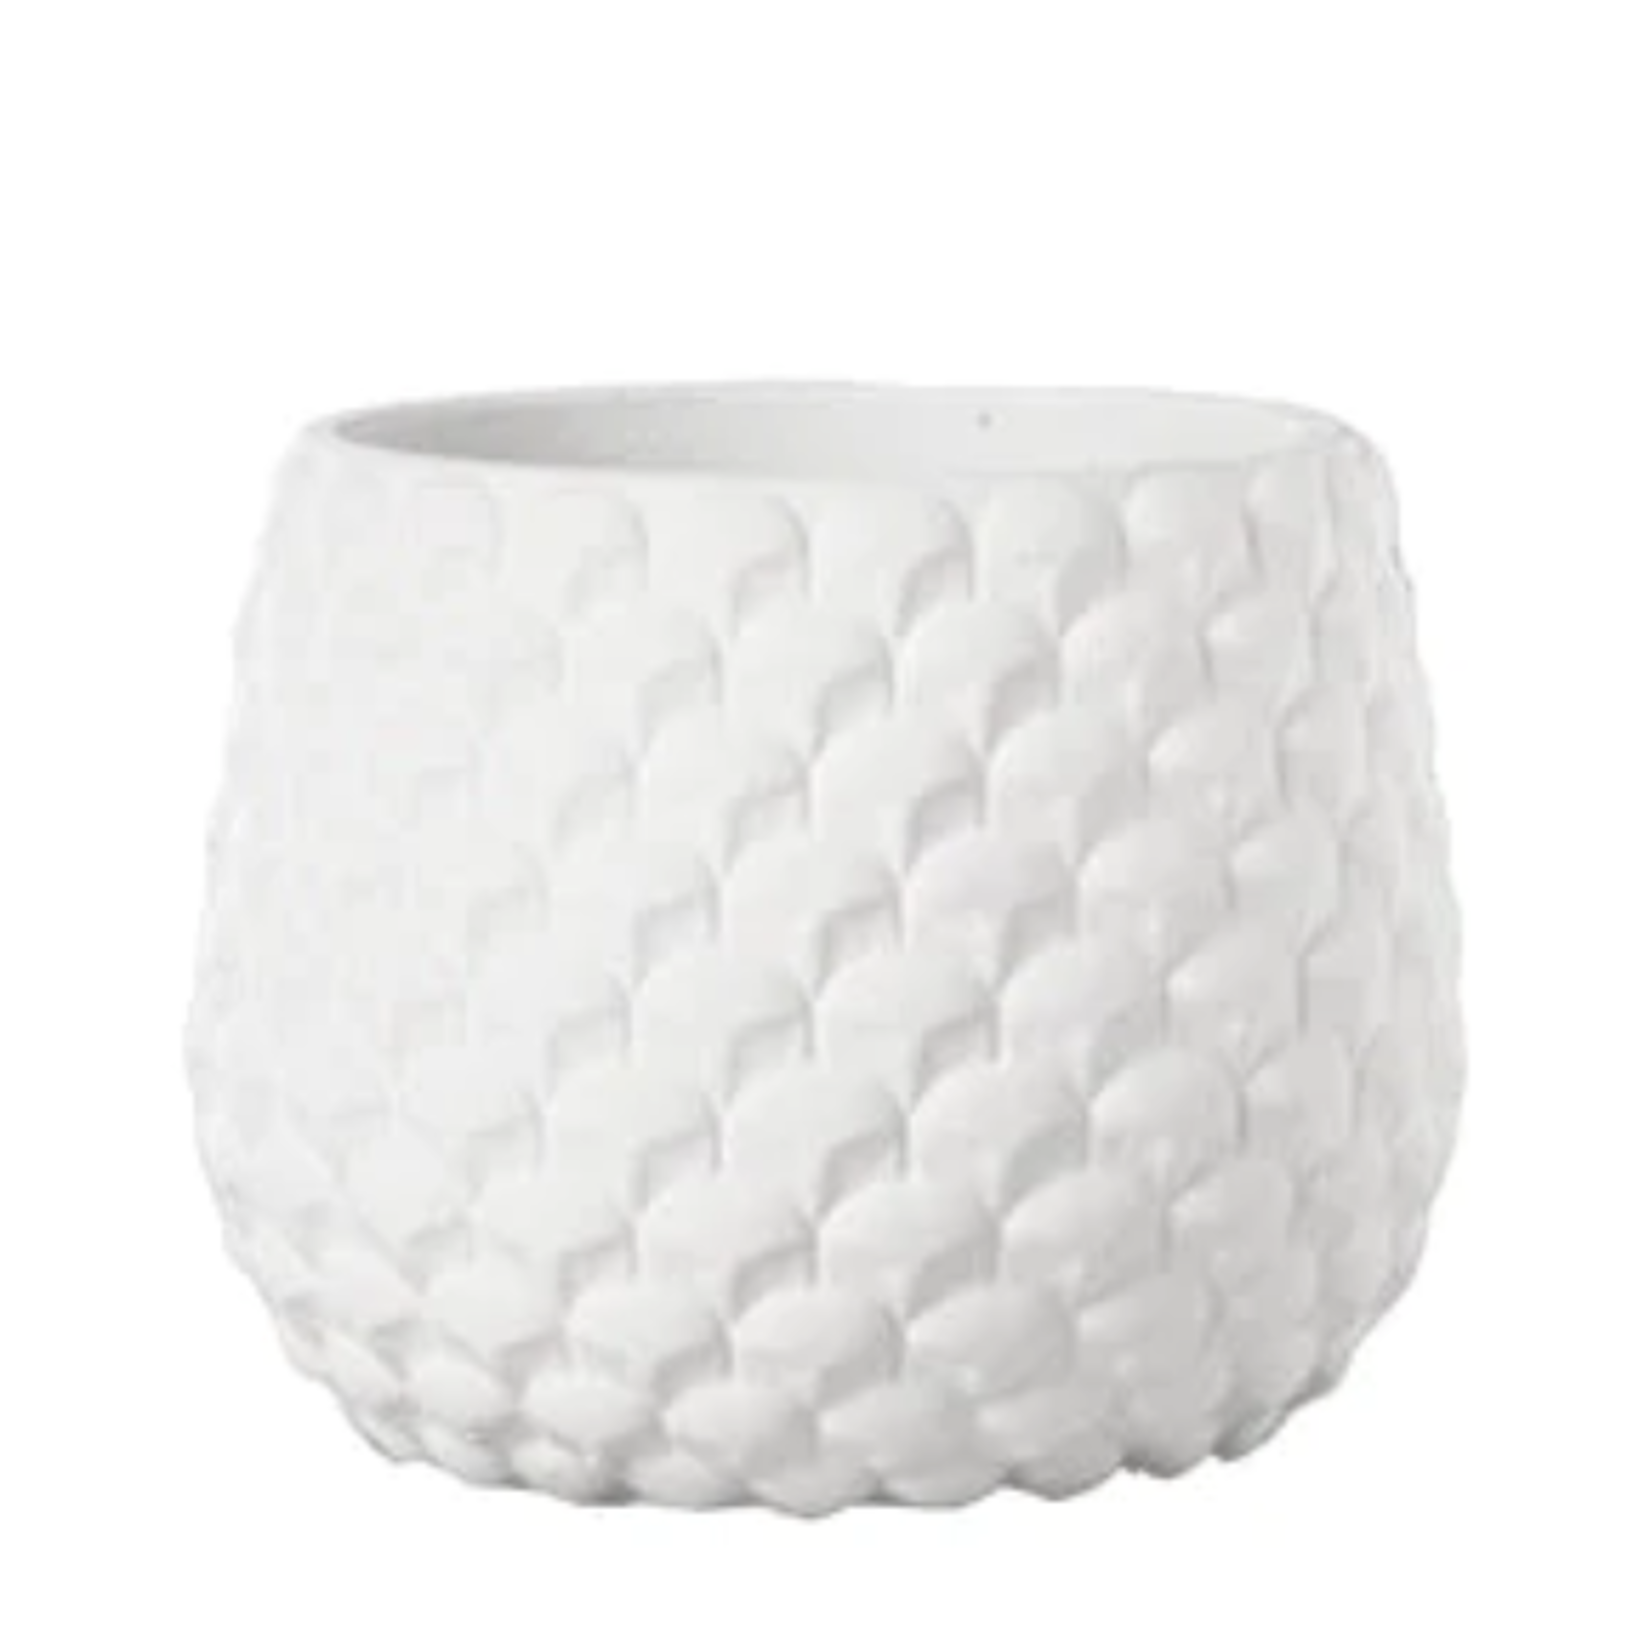 5.25”H X 6.25” WHITE SMALL Cement Round Pot with Embossed Geometric Pattern Design Body